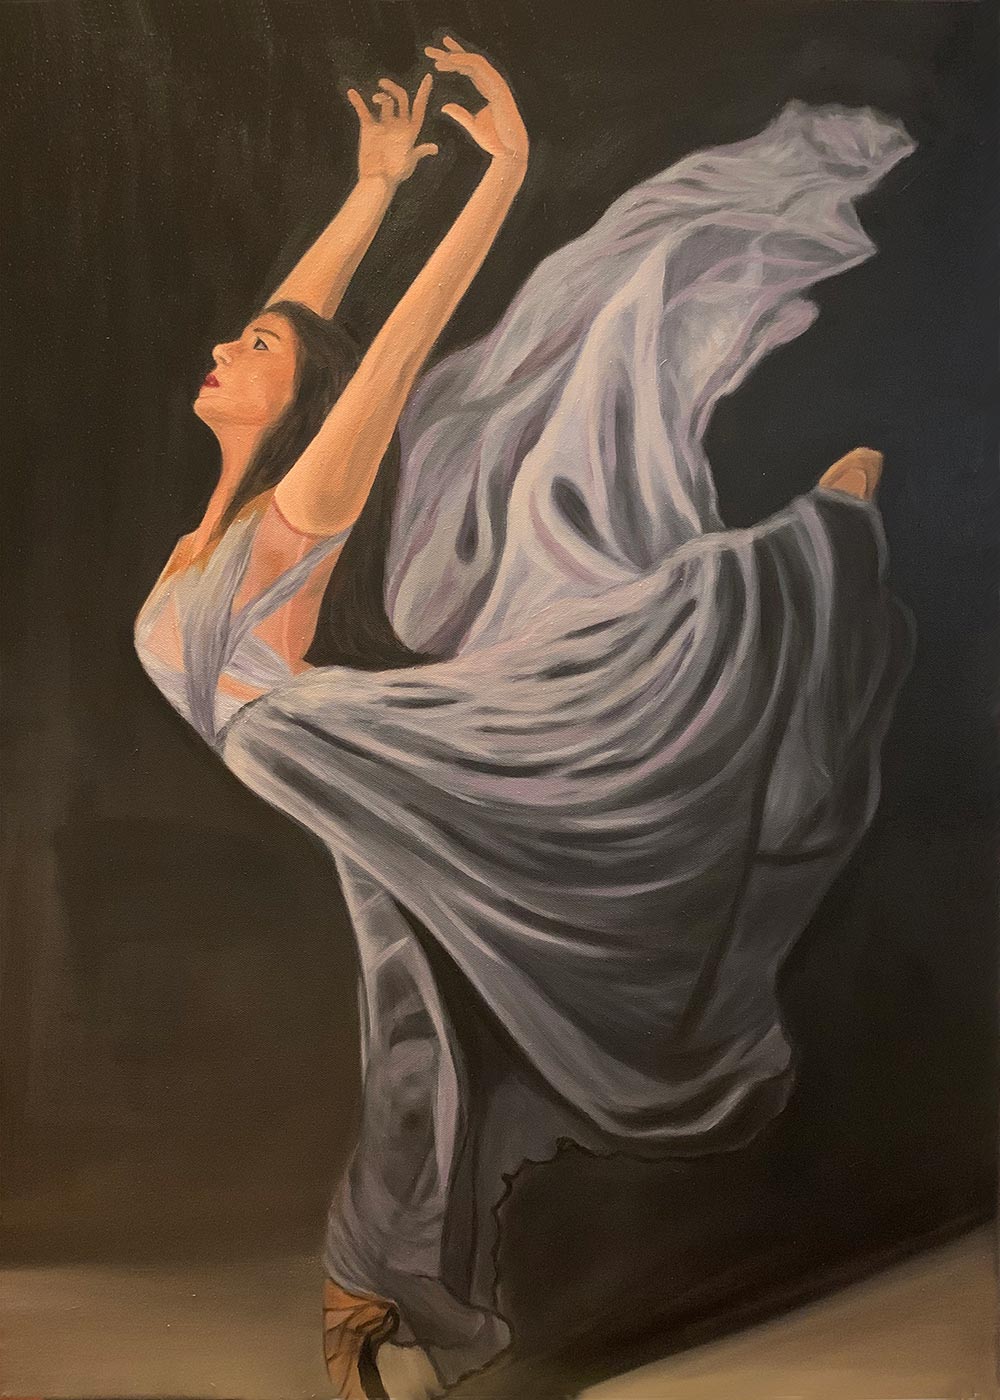 Buy painting online Singapore Exquisite Art Monica Aggarwal The Enigmatic Ballerina